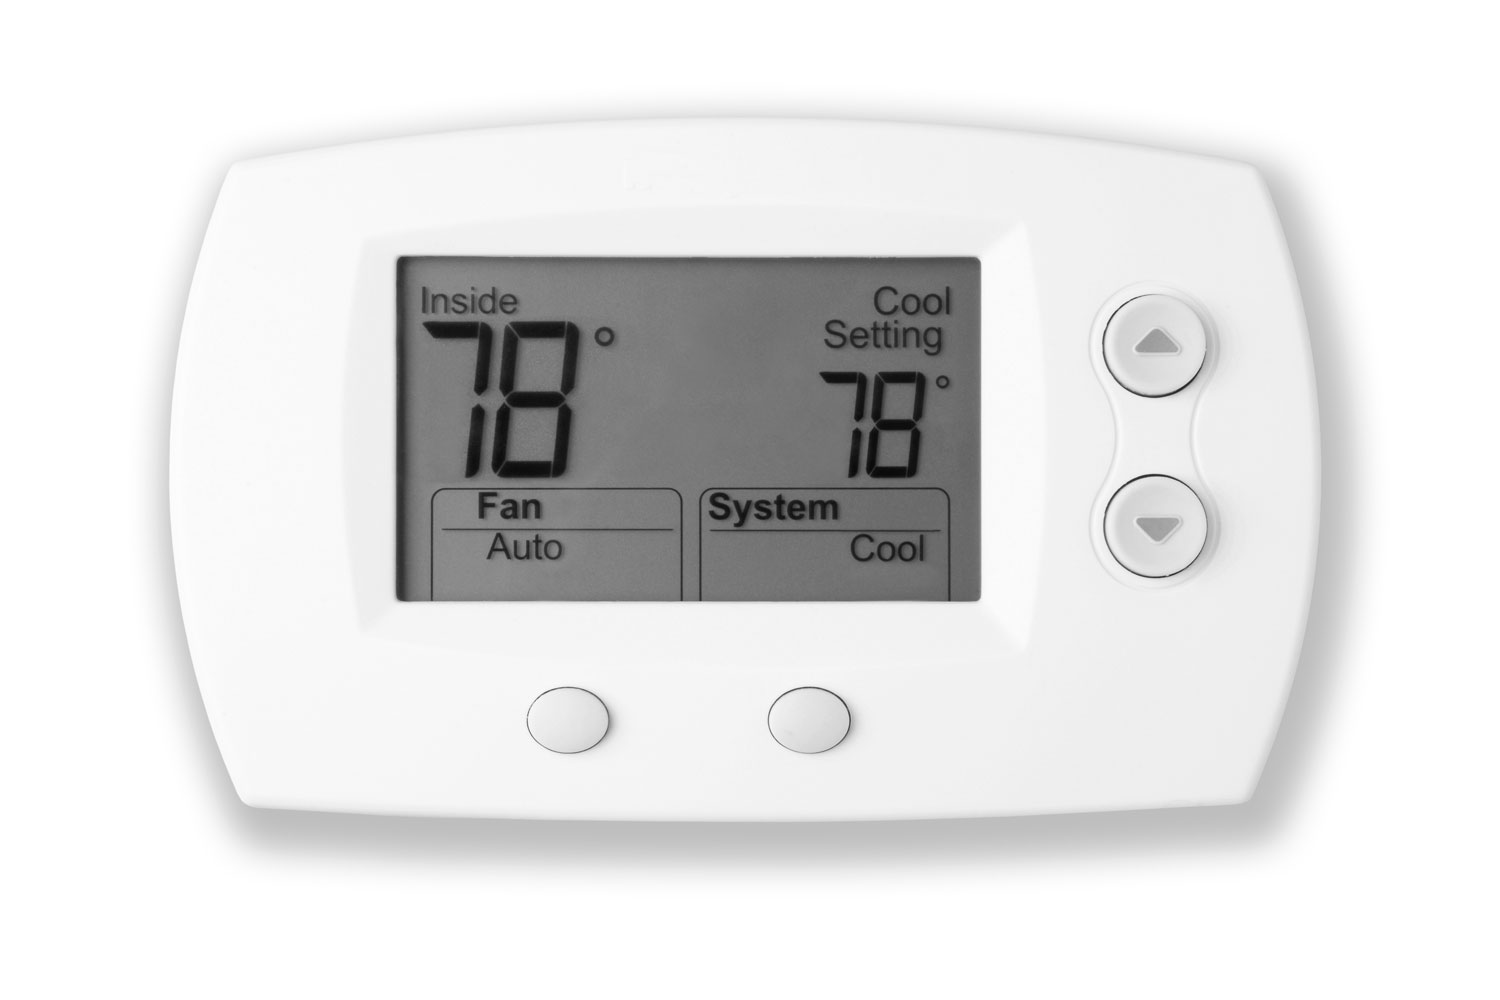 A thermostat set to 78 degrees mounted on a white wall